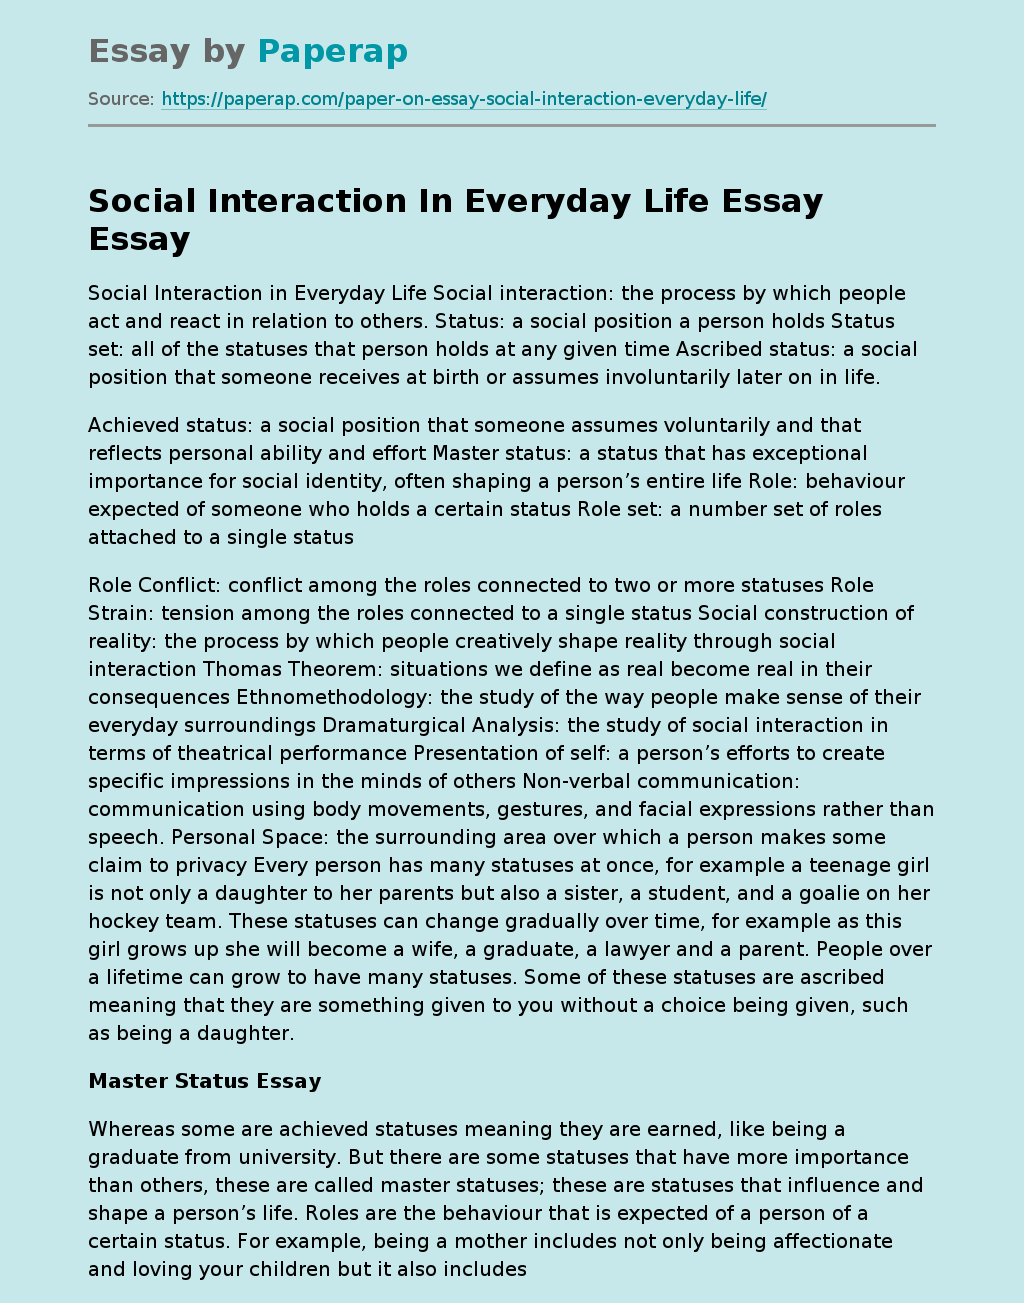 Social Interaction In Everyday Life Essay